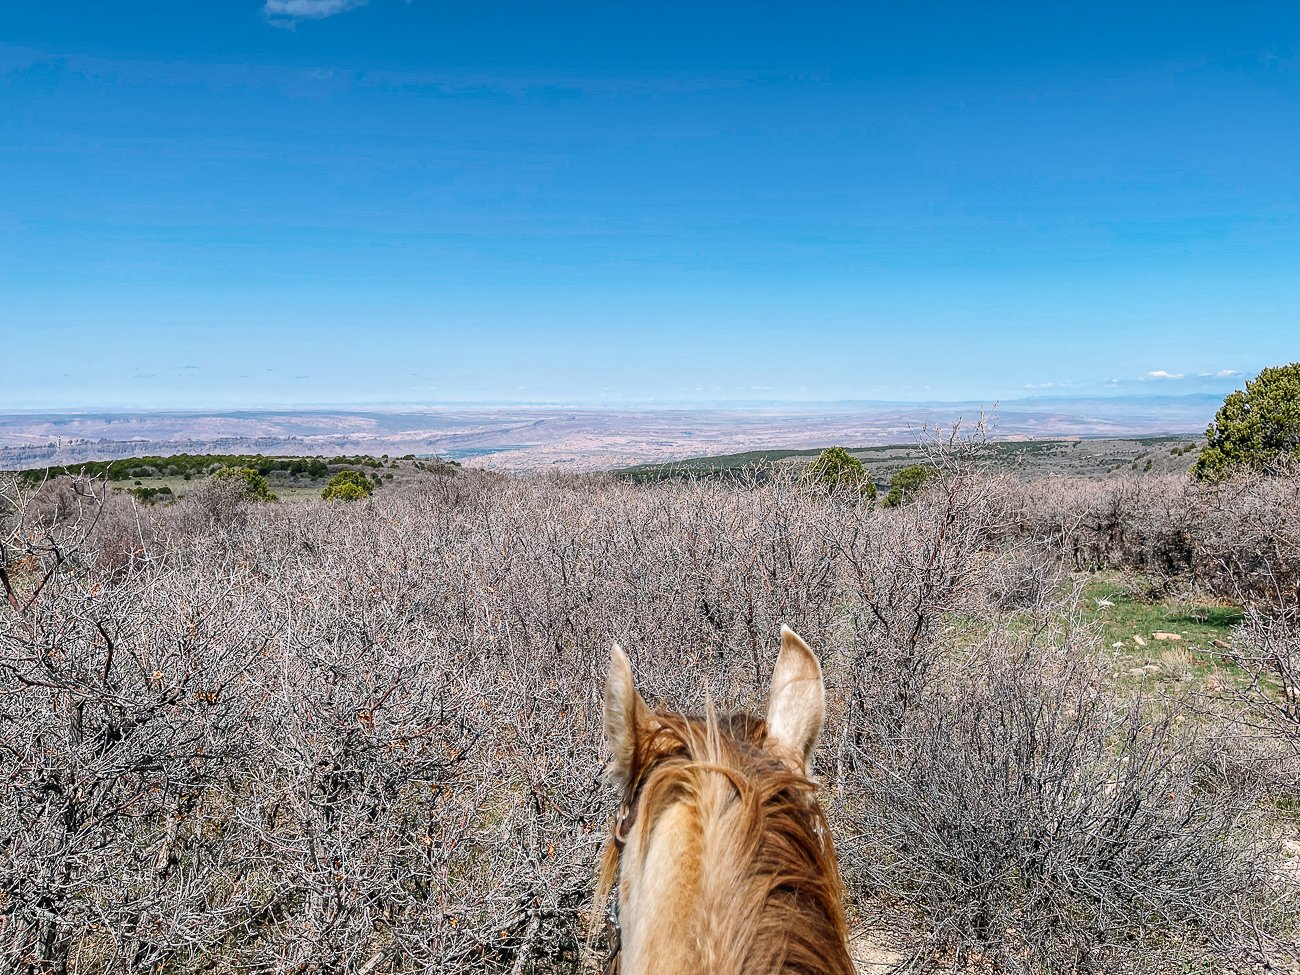 View from the back of a horse